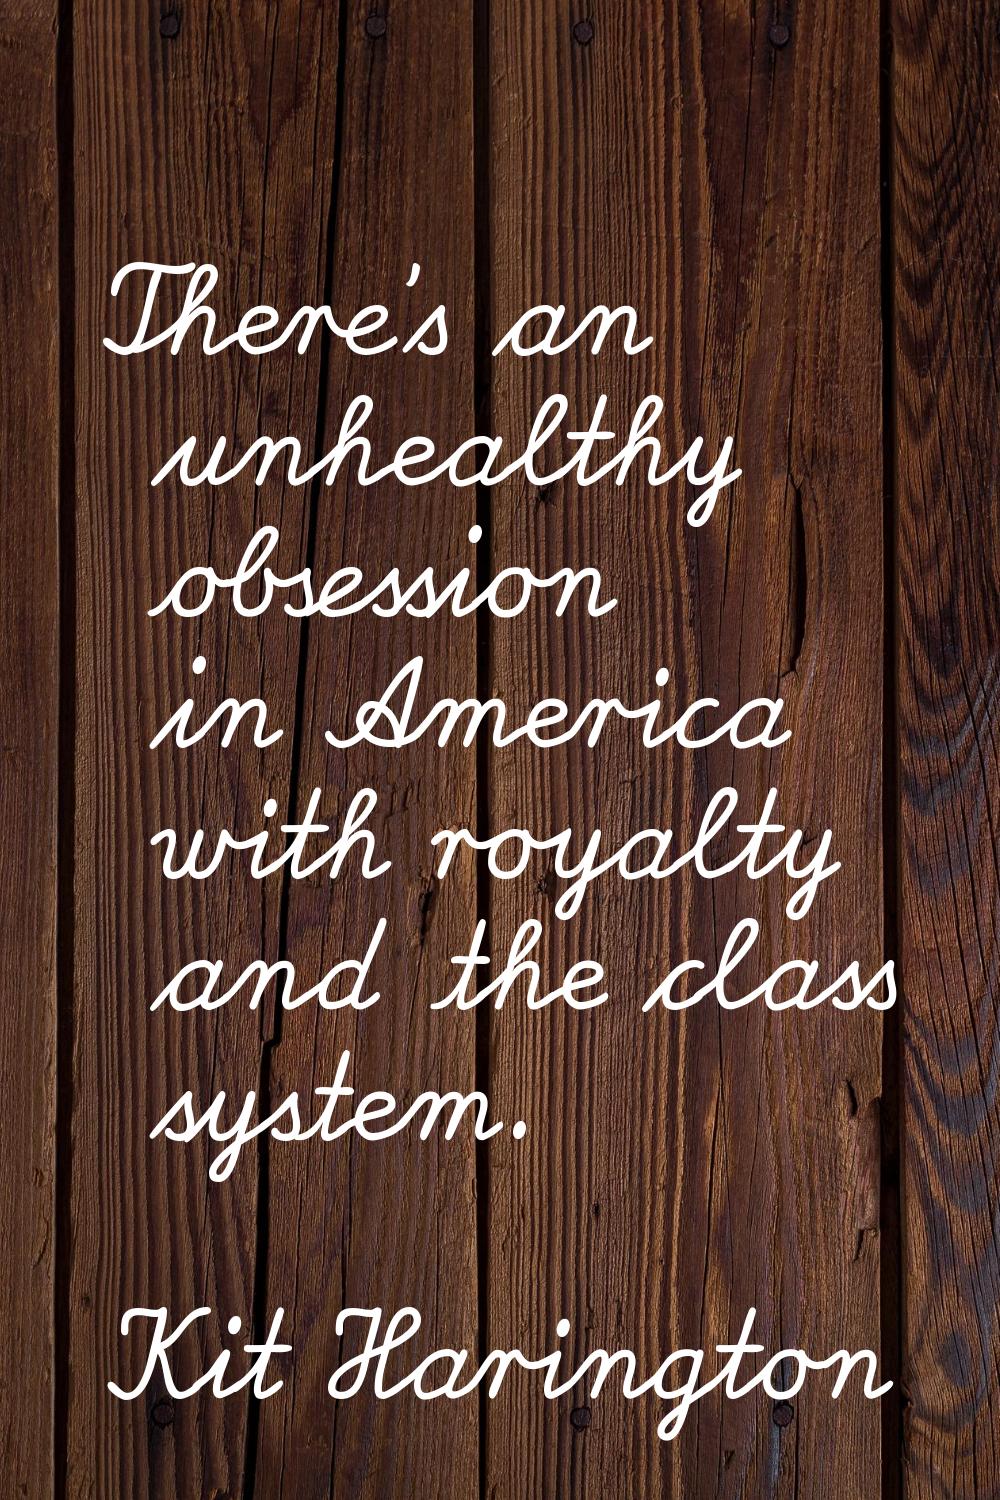 There's an unhealthy obsession in America with royalty and the class system.